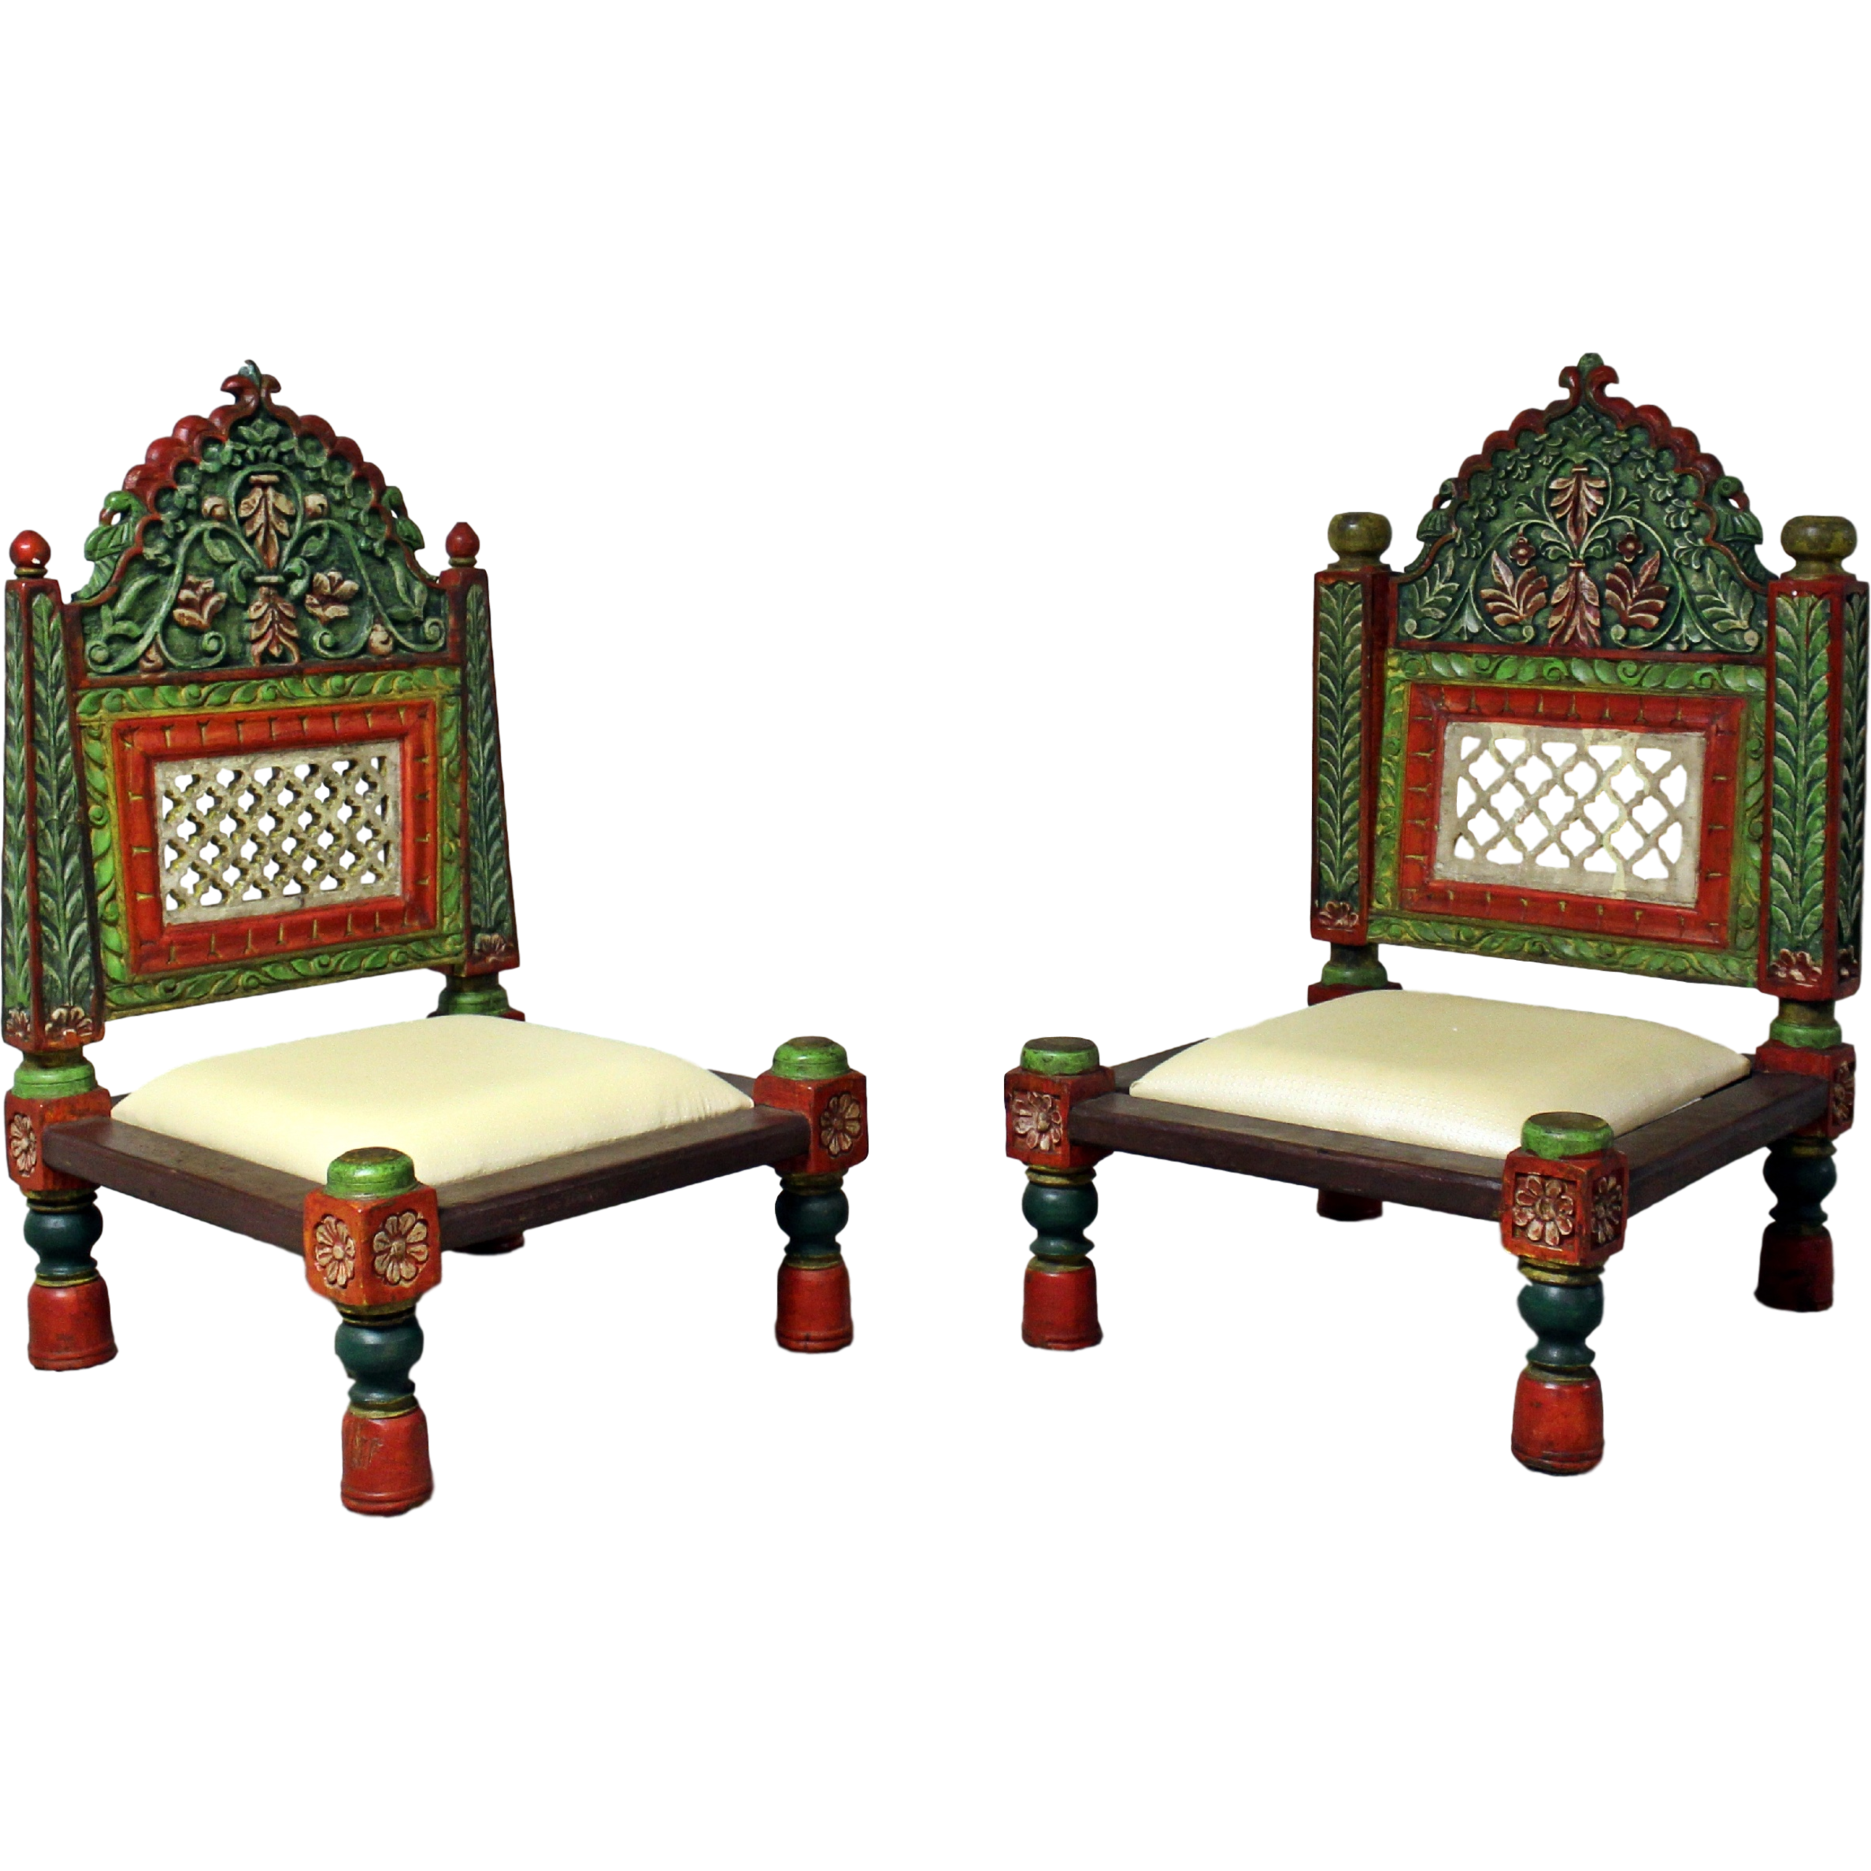 HAND PAINTED WOODEN CARVED LOW CHAIRS - Set of 2